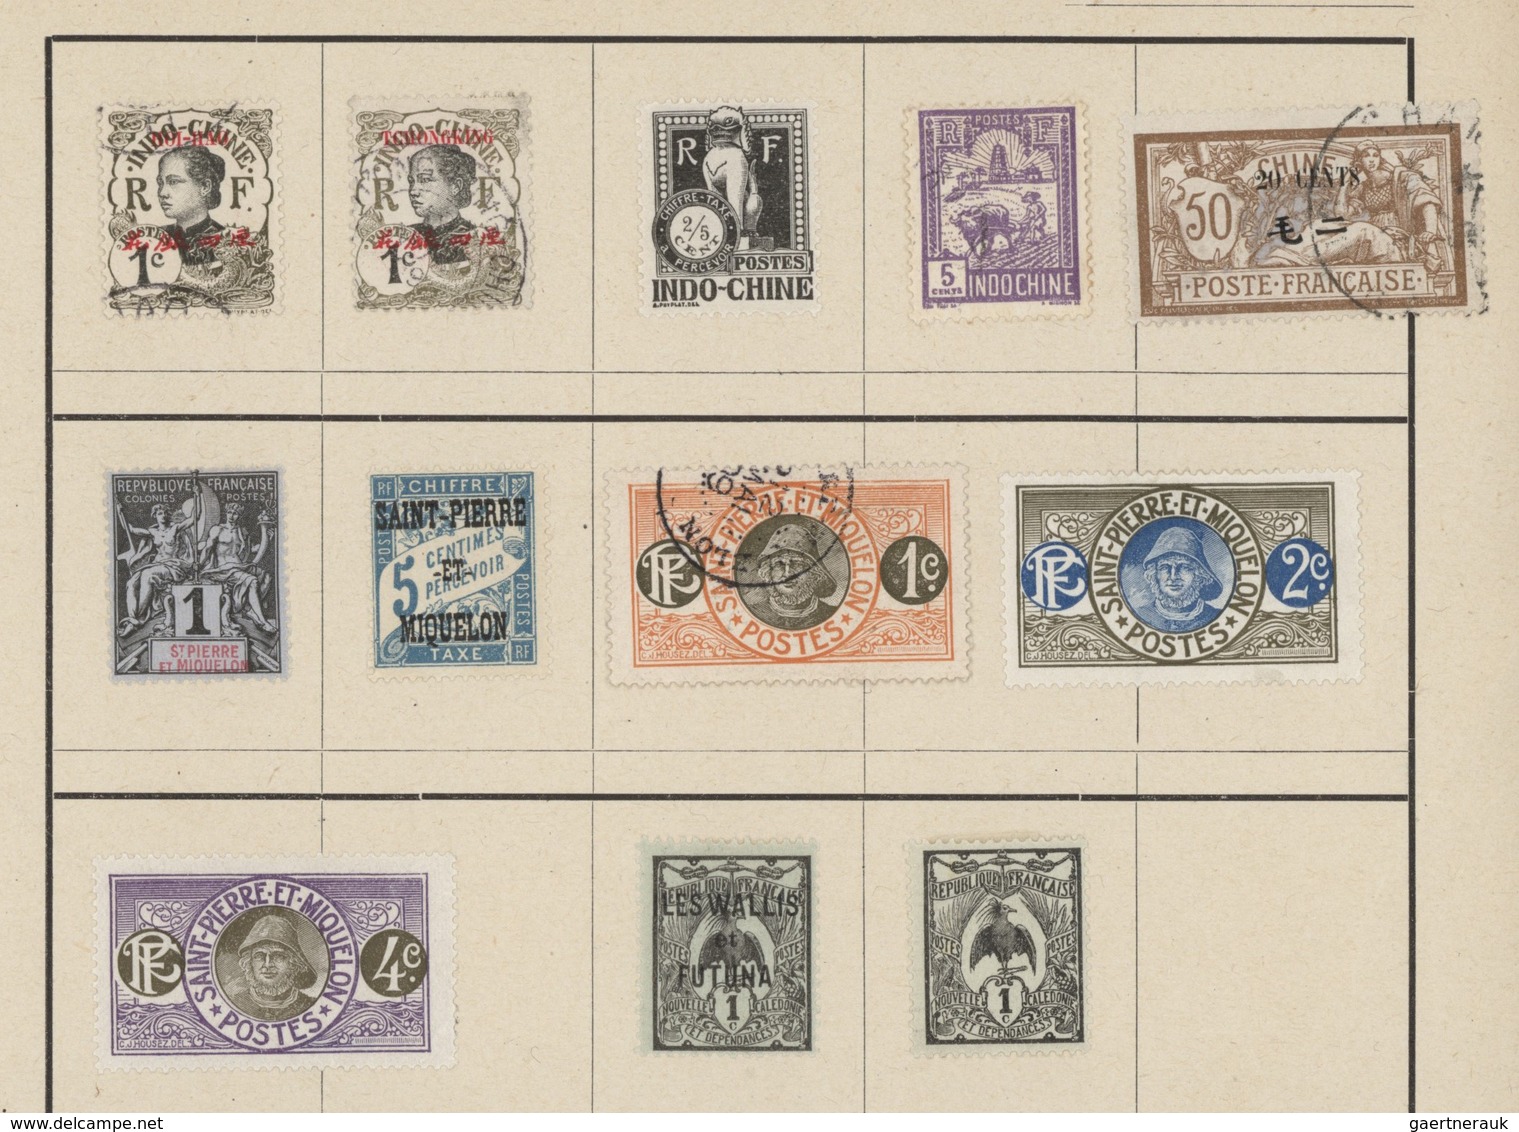 Asien: 1875/1930 (ca.), mint and used on old approval pages and in three envelopes, mainly Persia, I